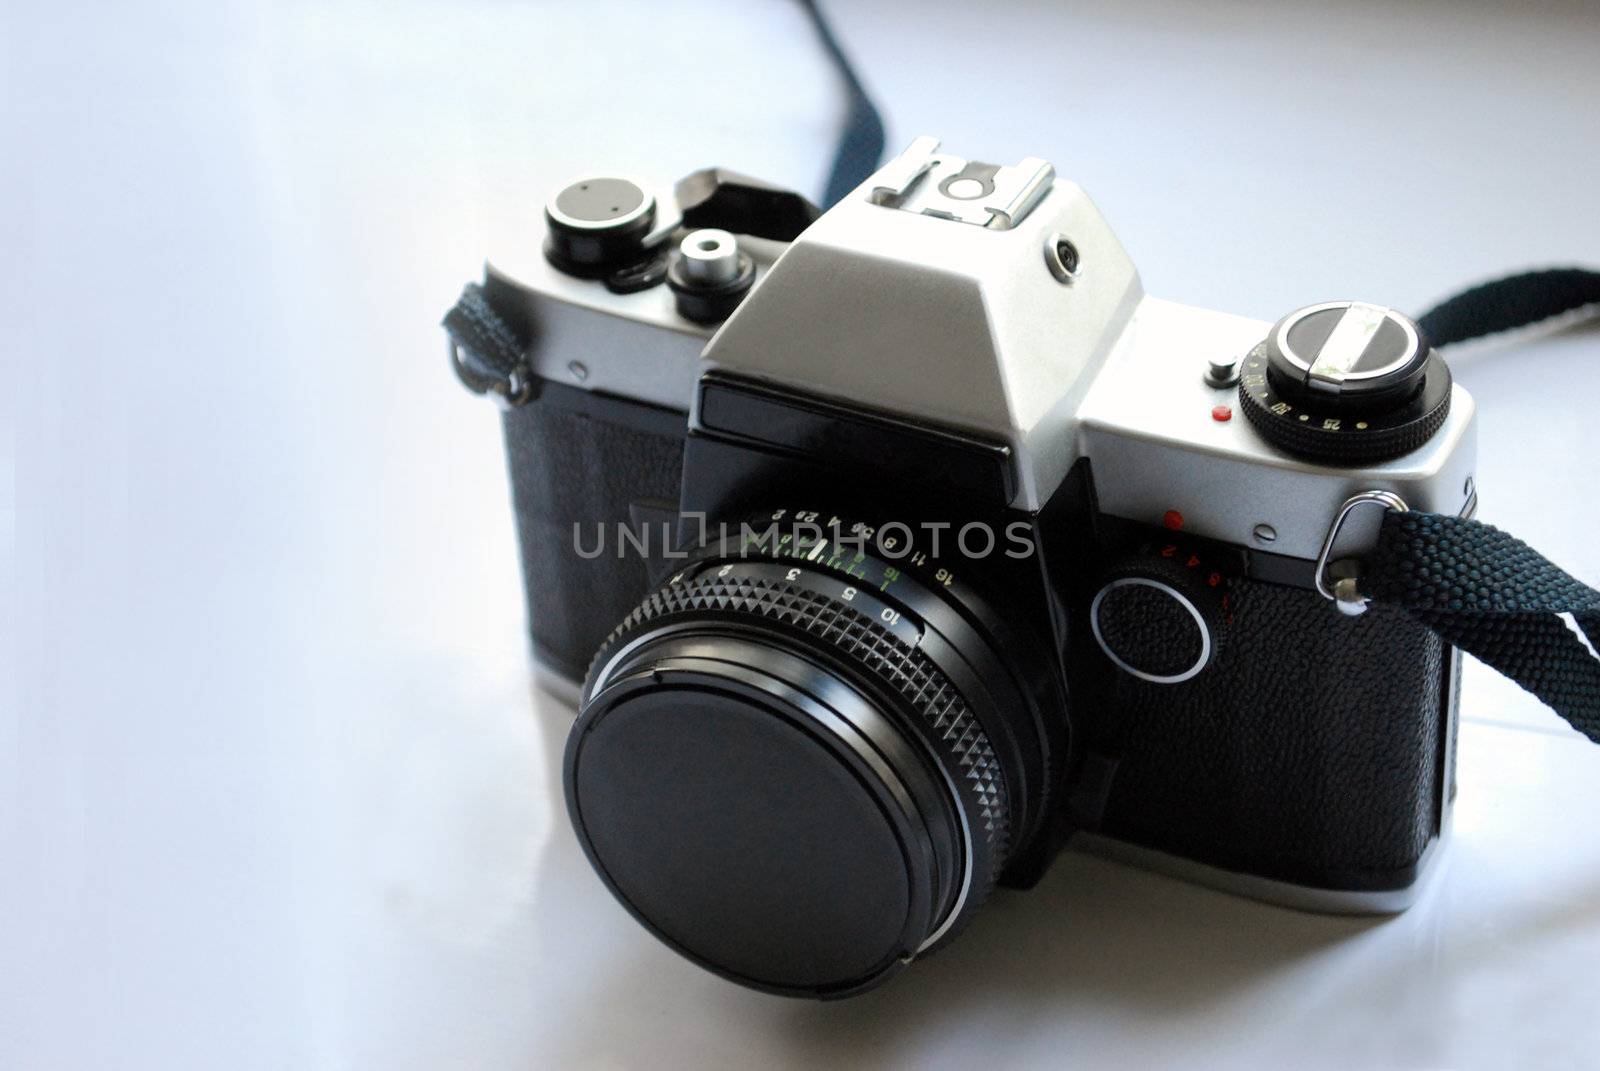 Retro film camera Kiev-19 without trademark label good for background and design